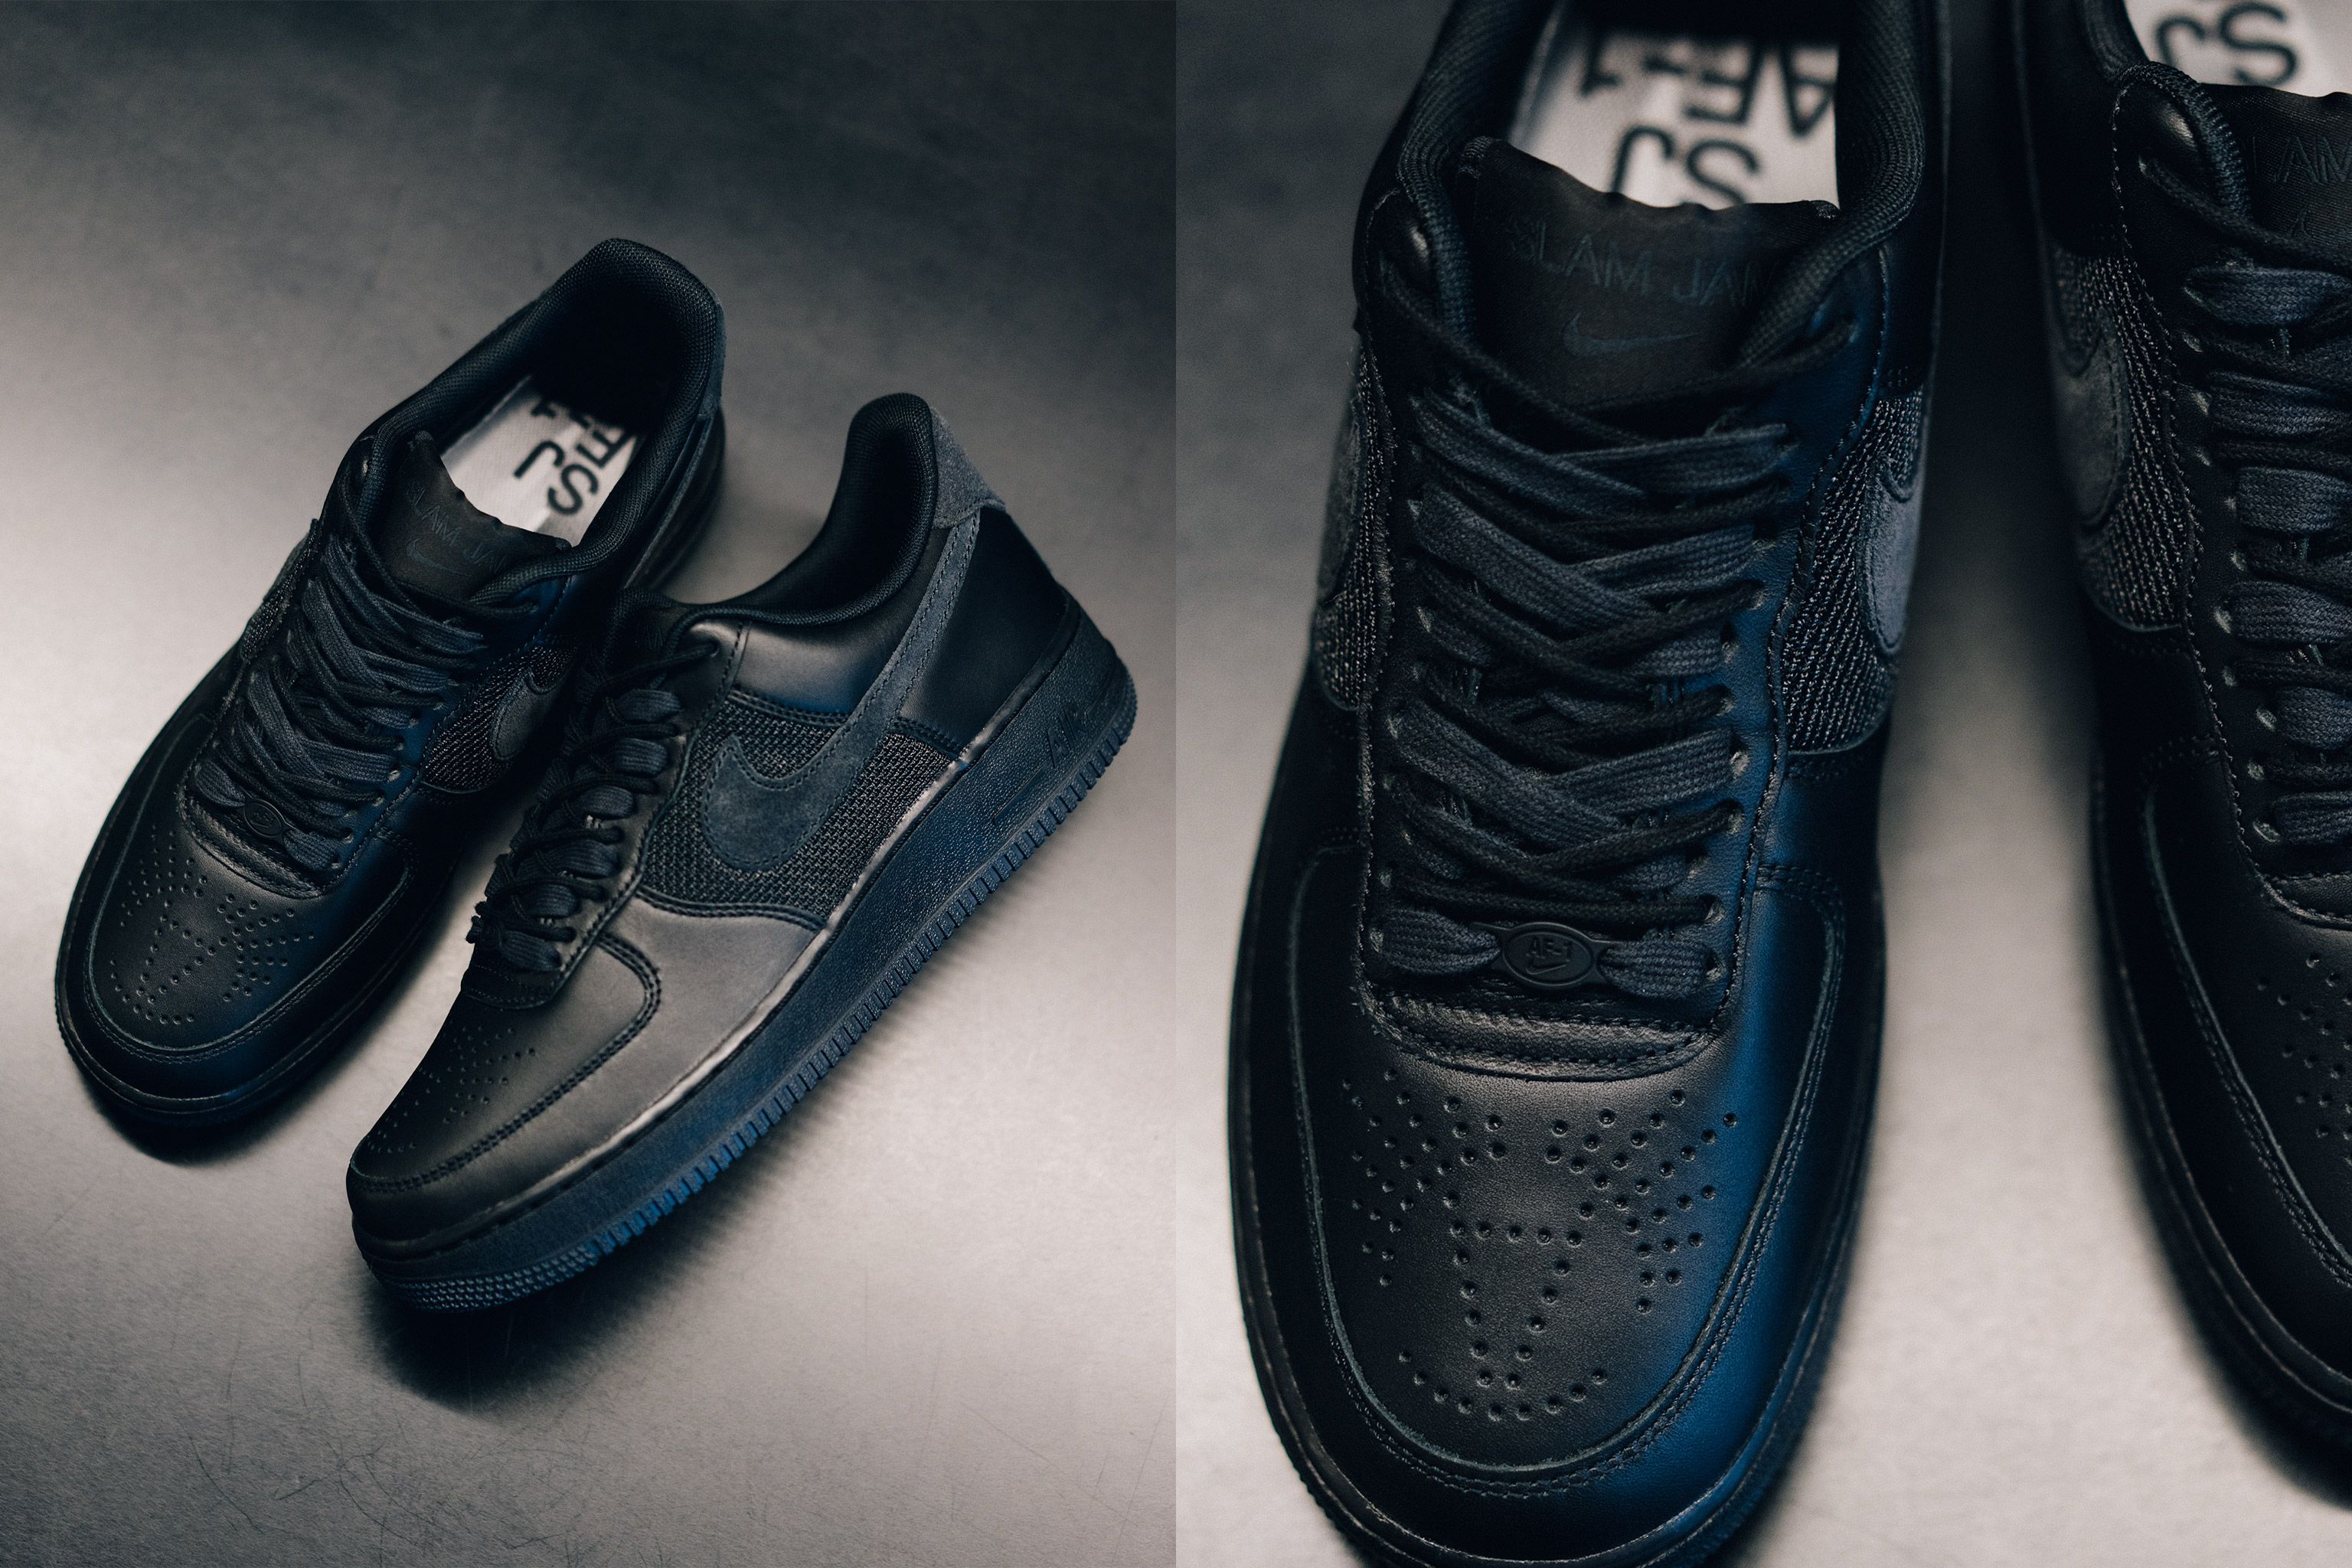 Nike x Slam Jam Air Force 1 Low Black | Now Available | HAVEN